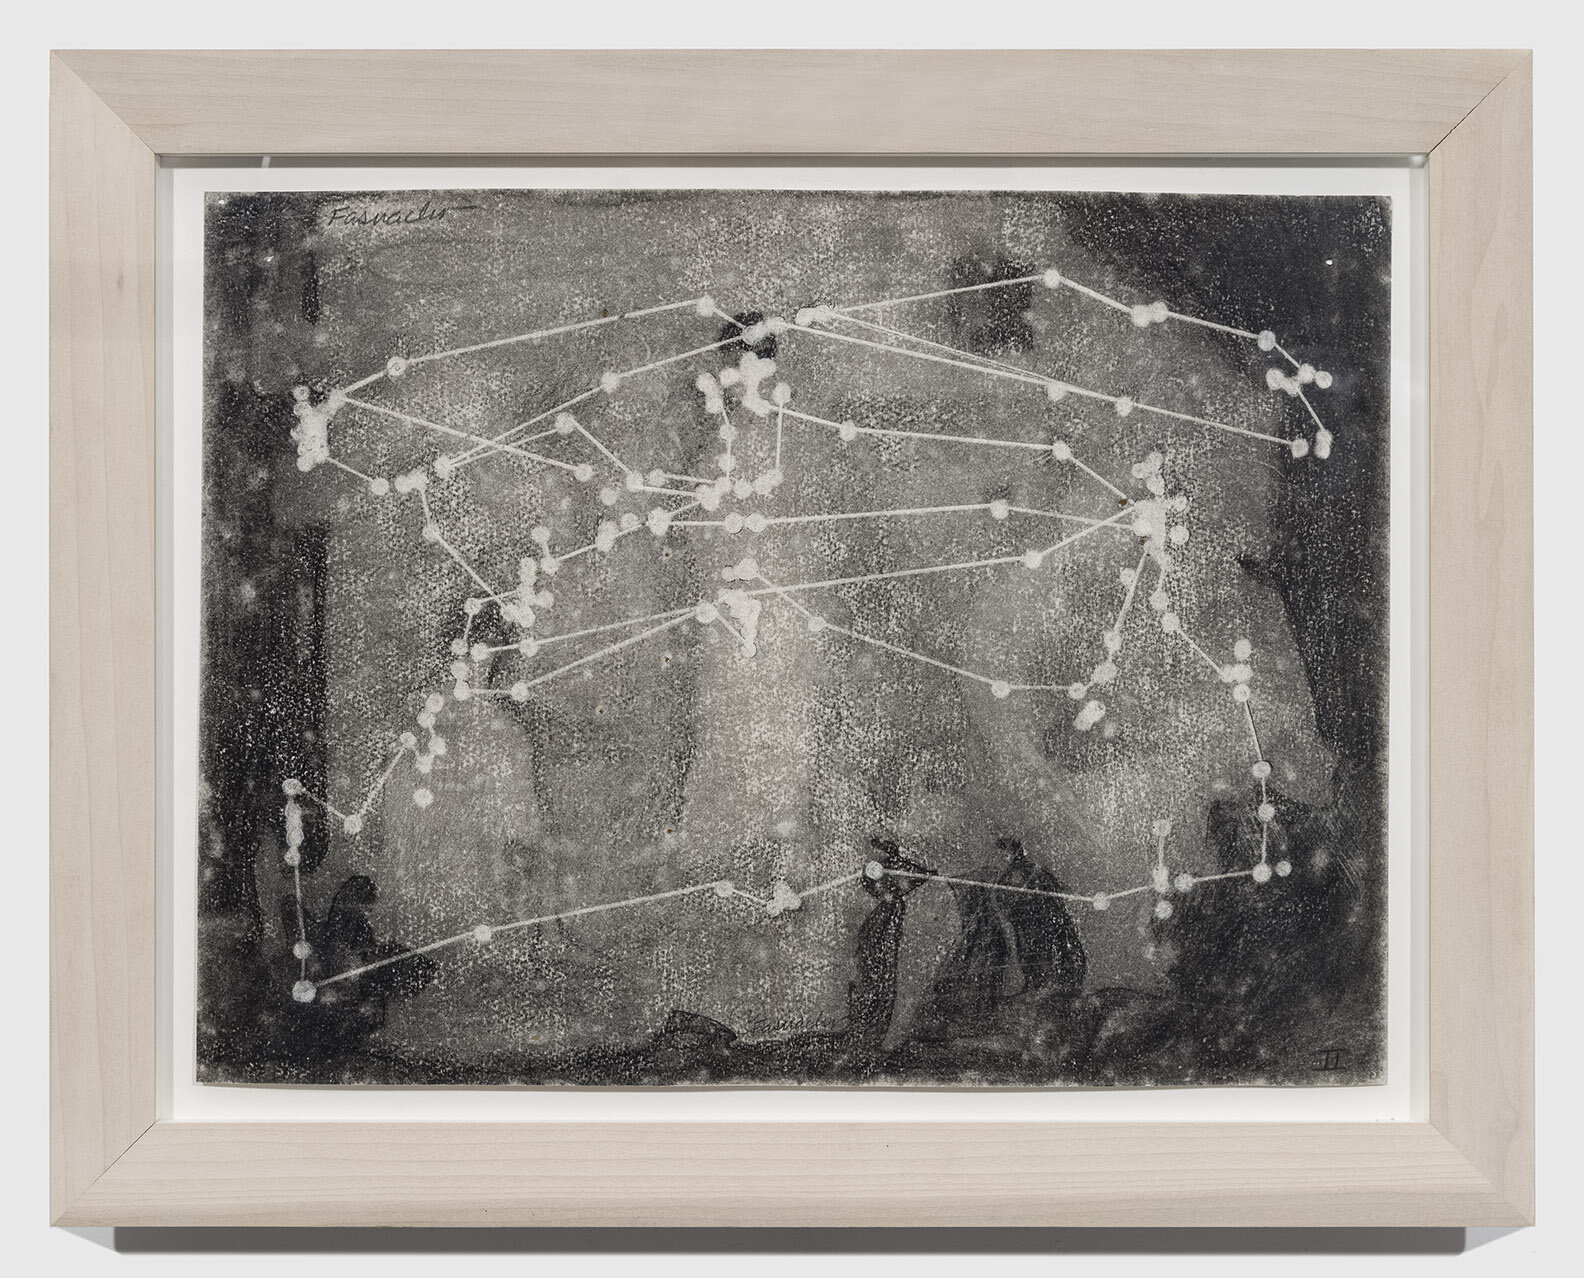 REM 5, 1996-97, Graphite on paper, 15 x 20 inches